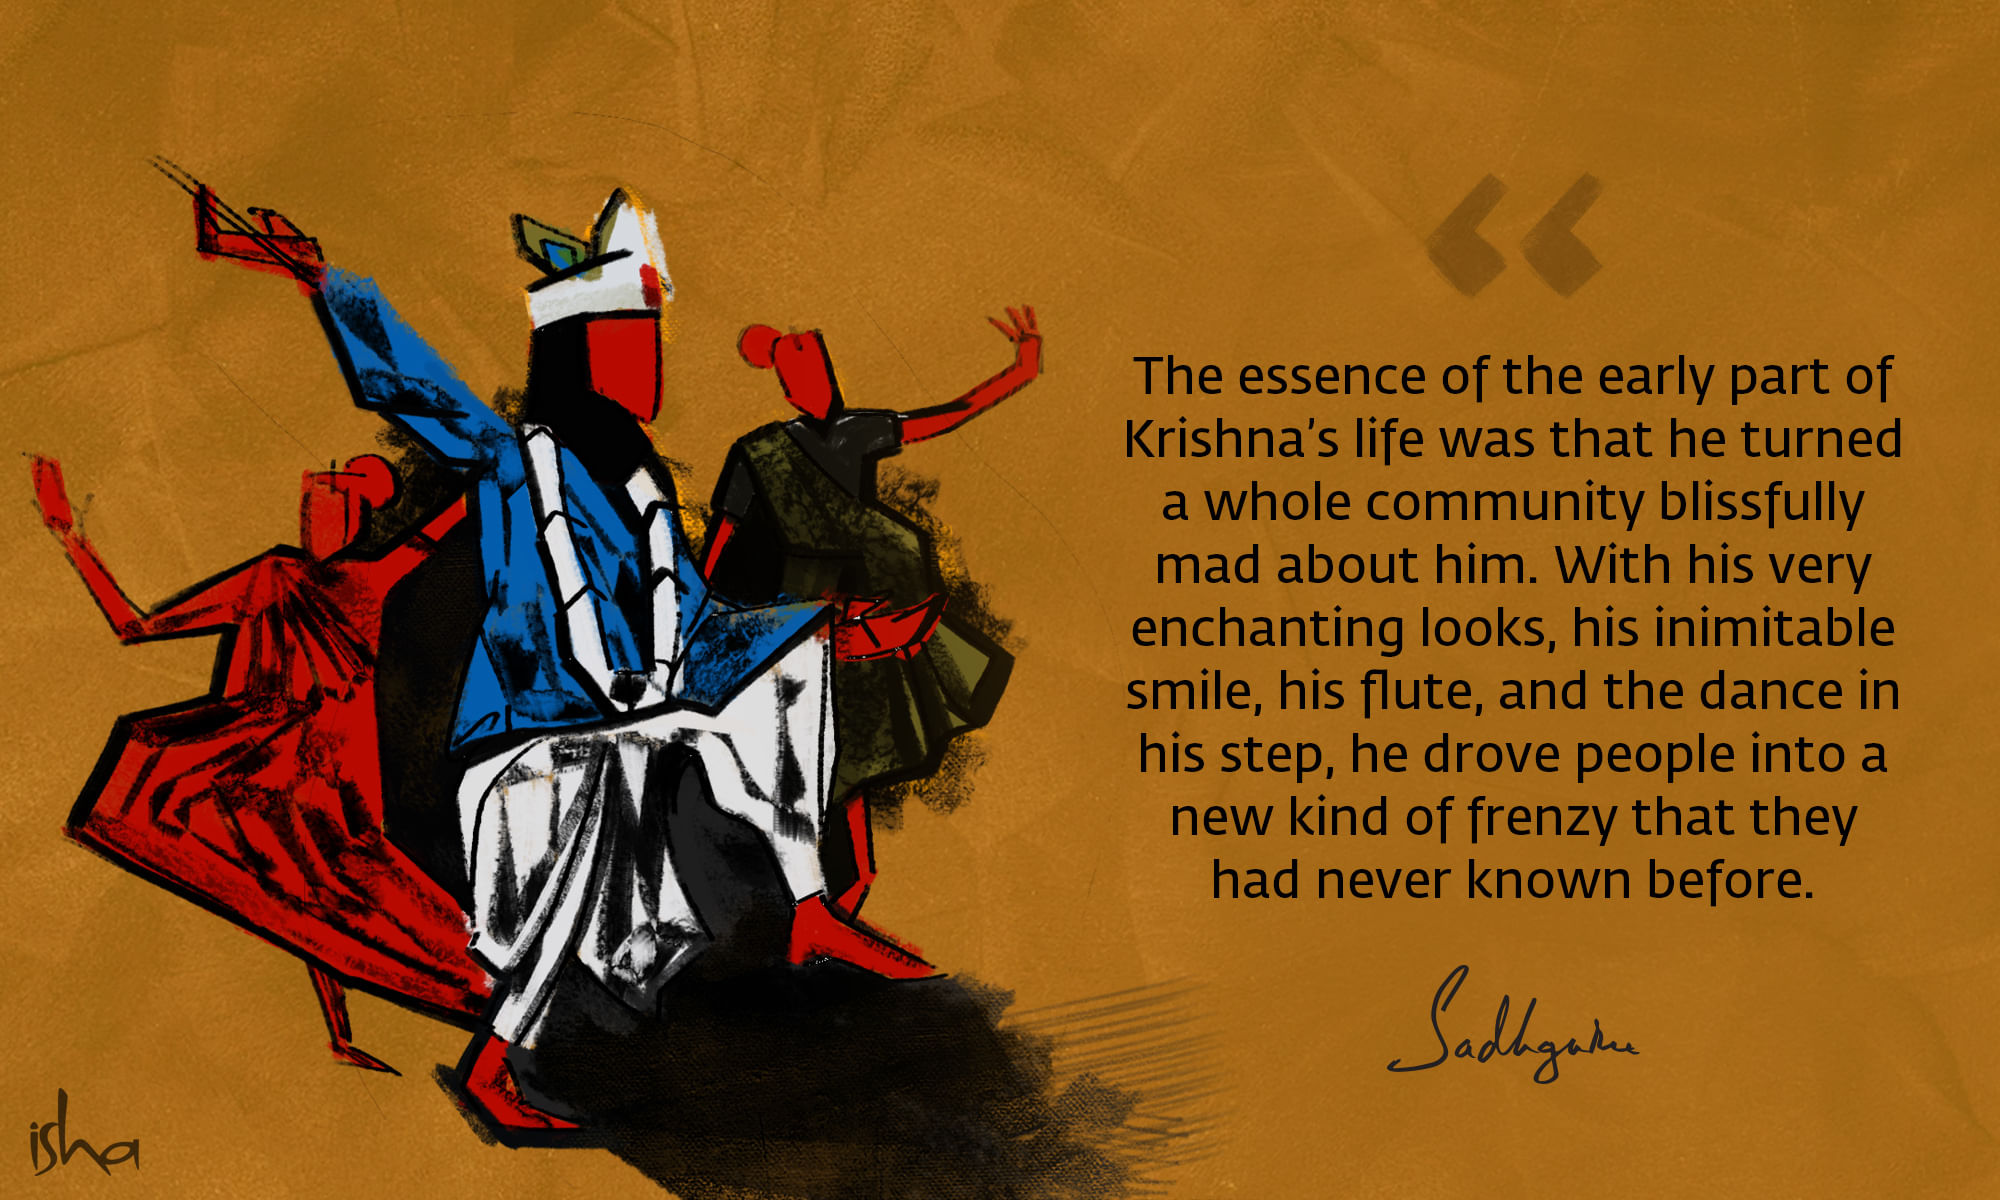 Krishna quote from Sadhguru with abstract Krishna dancing wildly with the gopis.